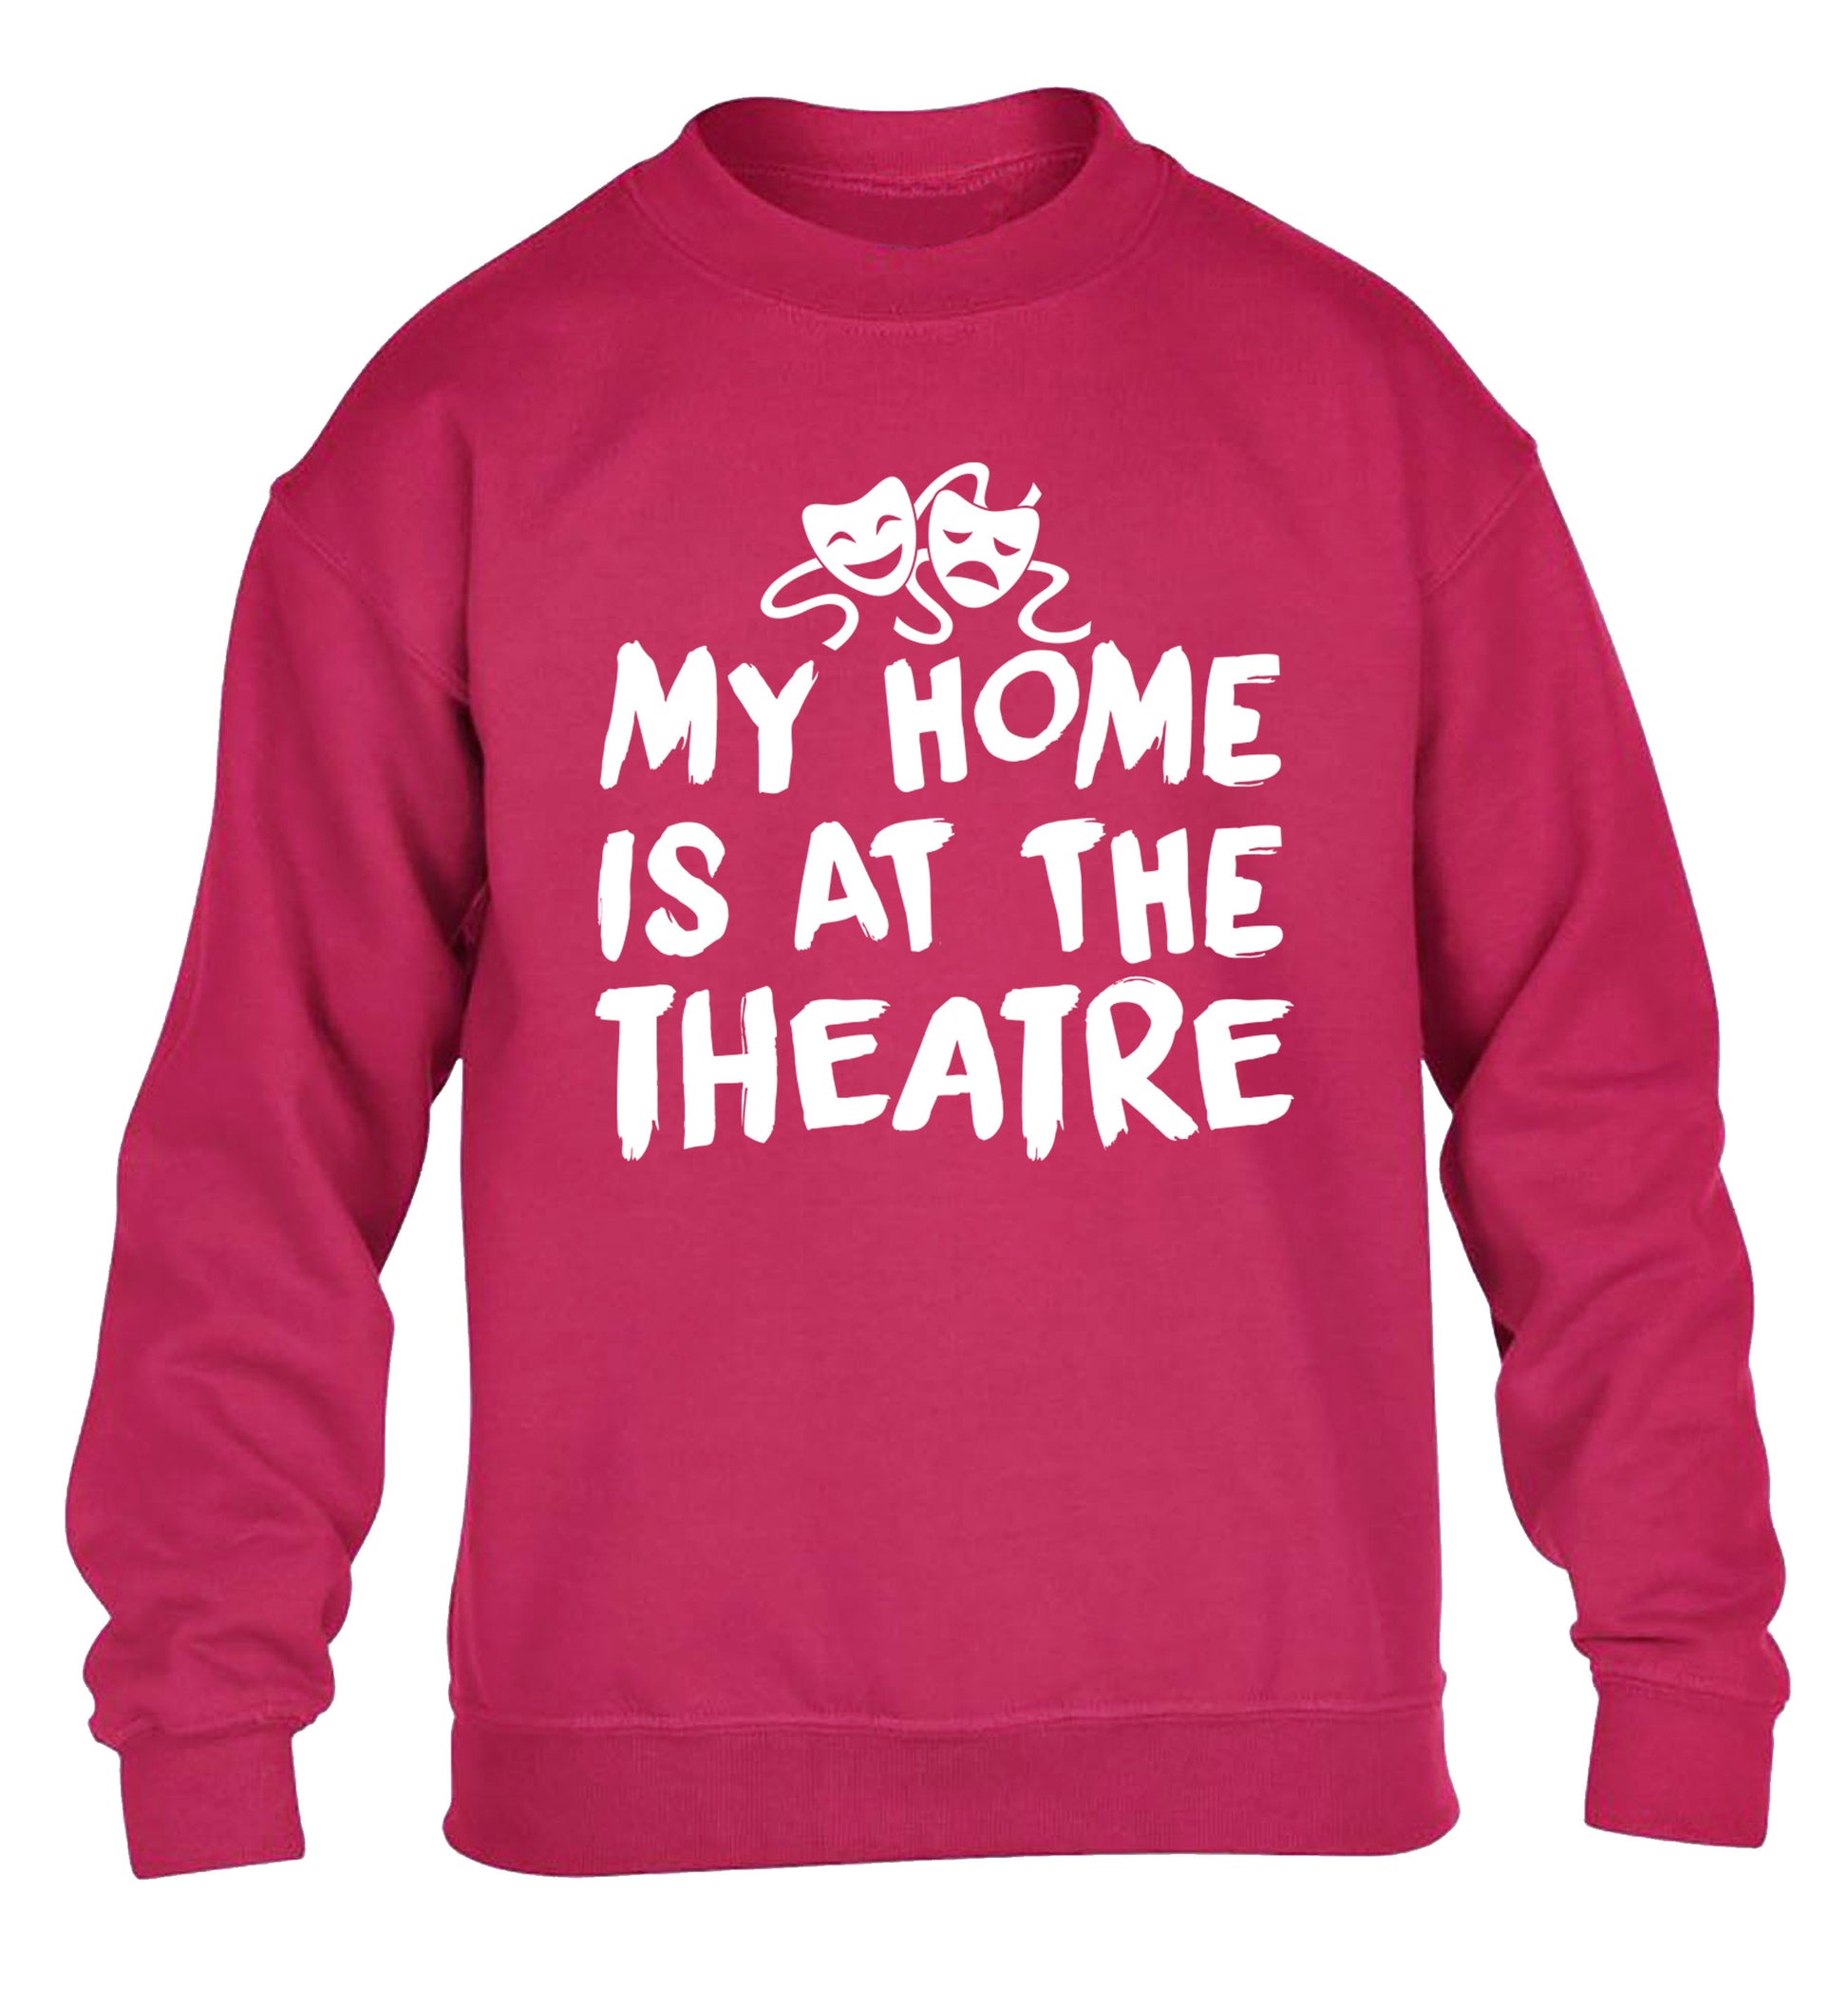 My home is at the theatre children's pink sweater 12-14 Years